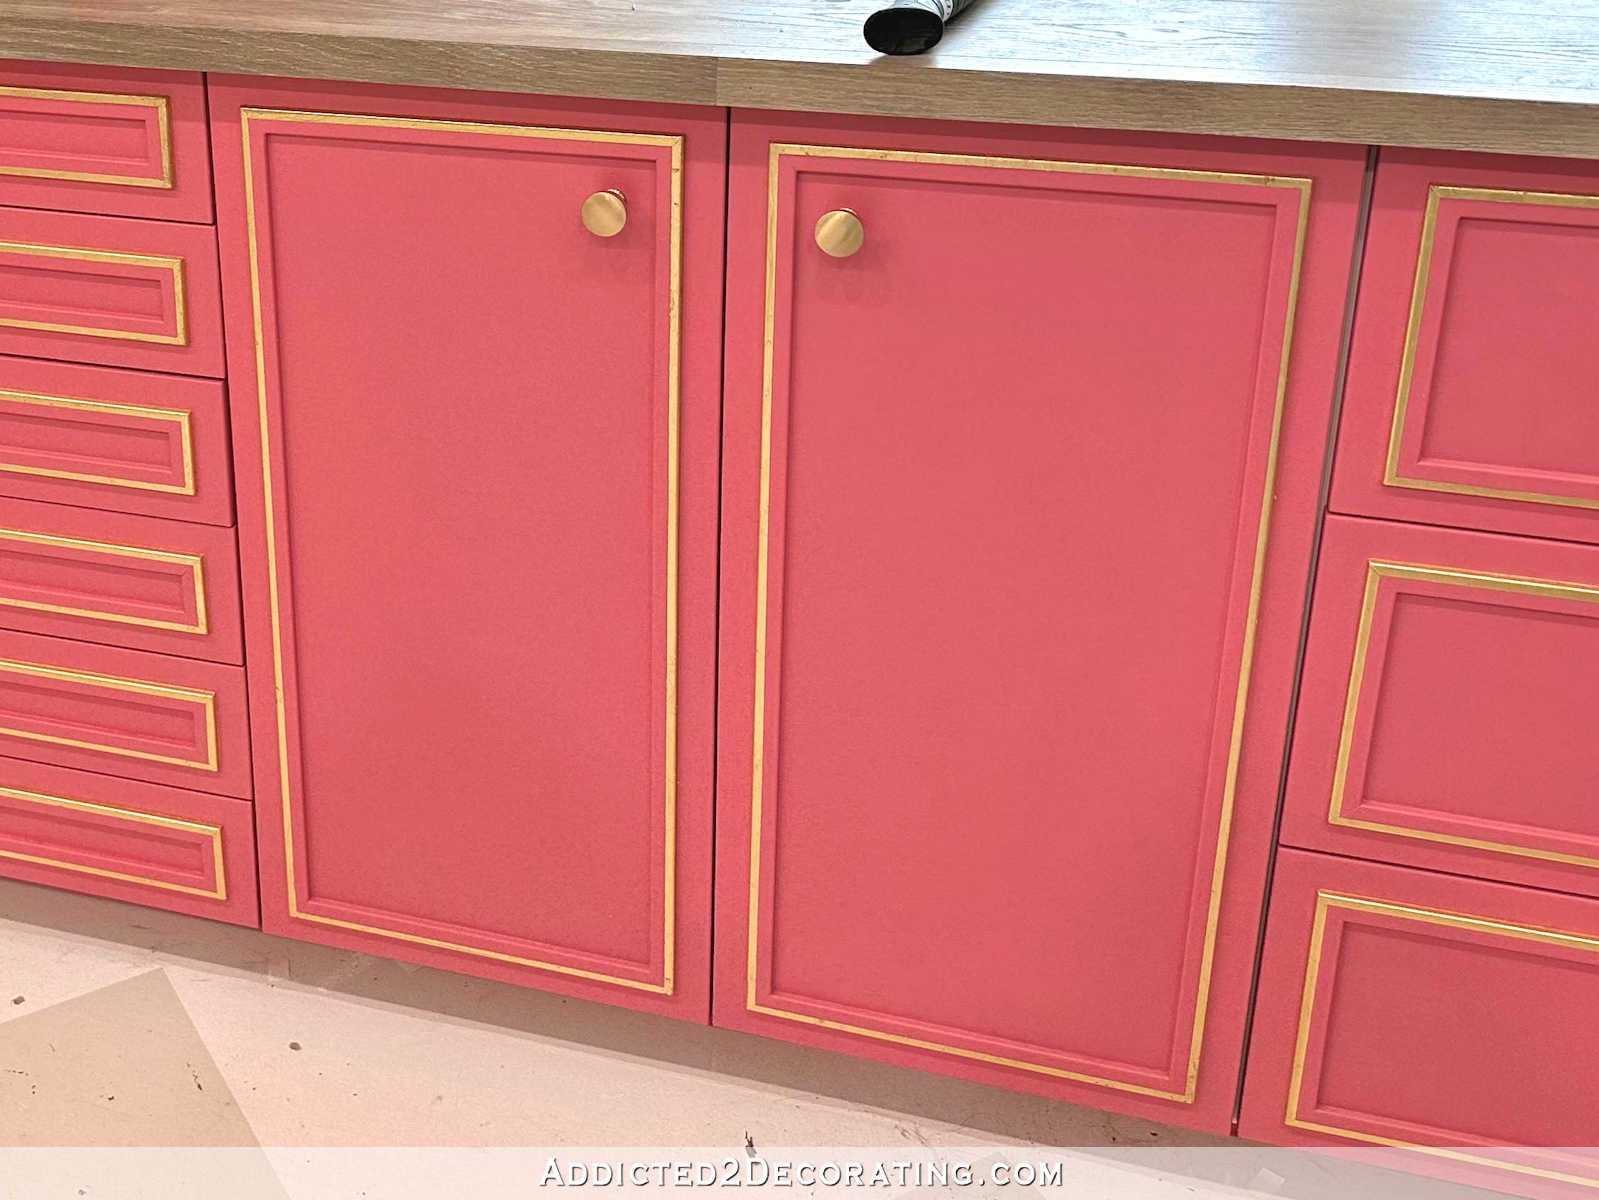 A Much Easier Way To “Gold Leaf” Cabinets (And Many Other Things)